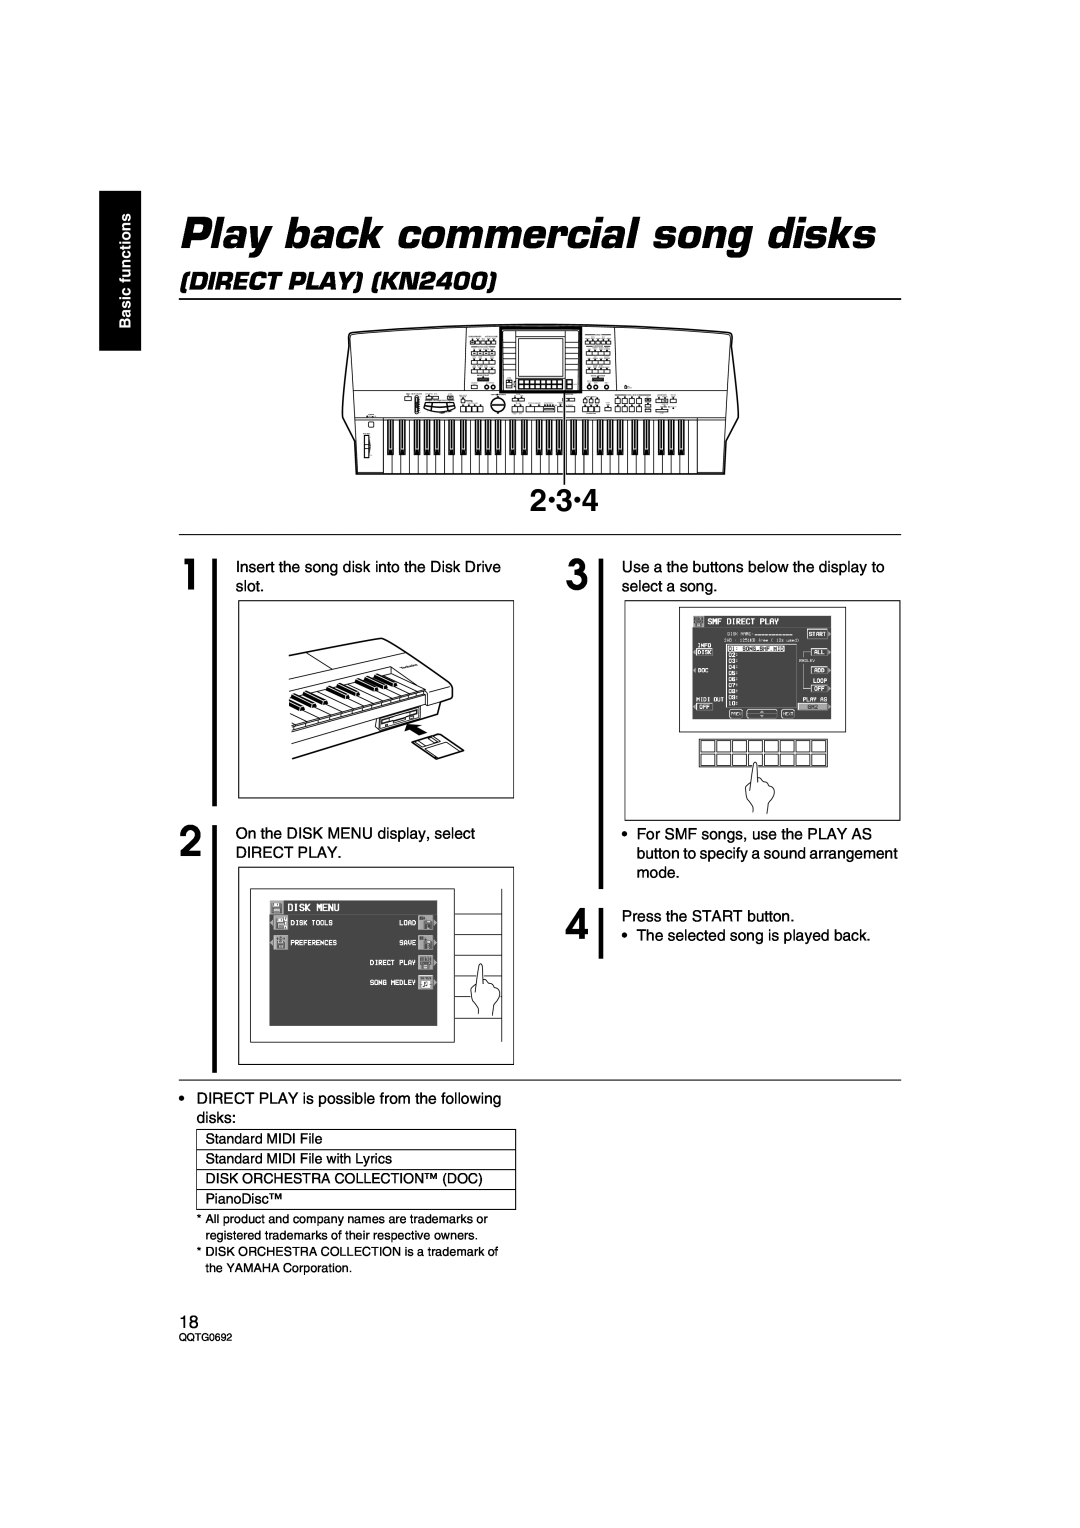 Panasonic SX-KN2600 Play back commercial song disks, DIRECT PLAY KN2400, Basic functions, QQTG0692, Effect, Sound Group 